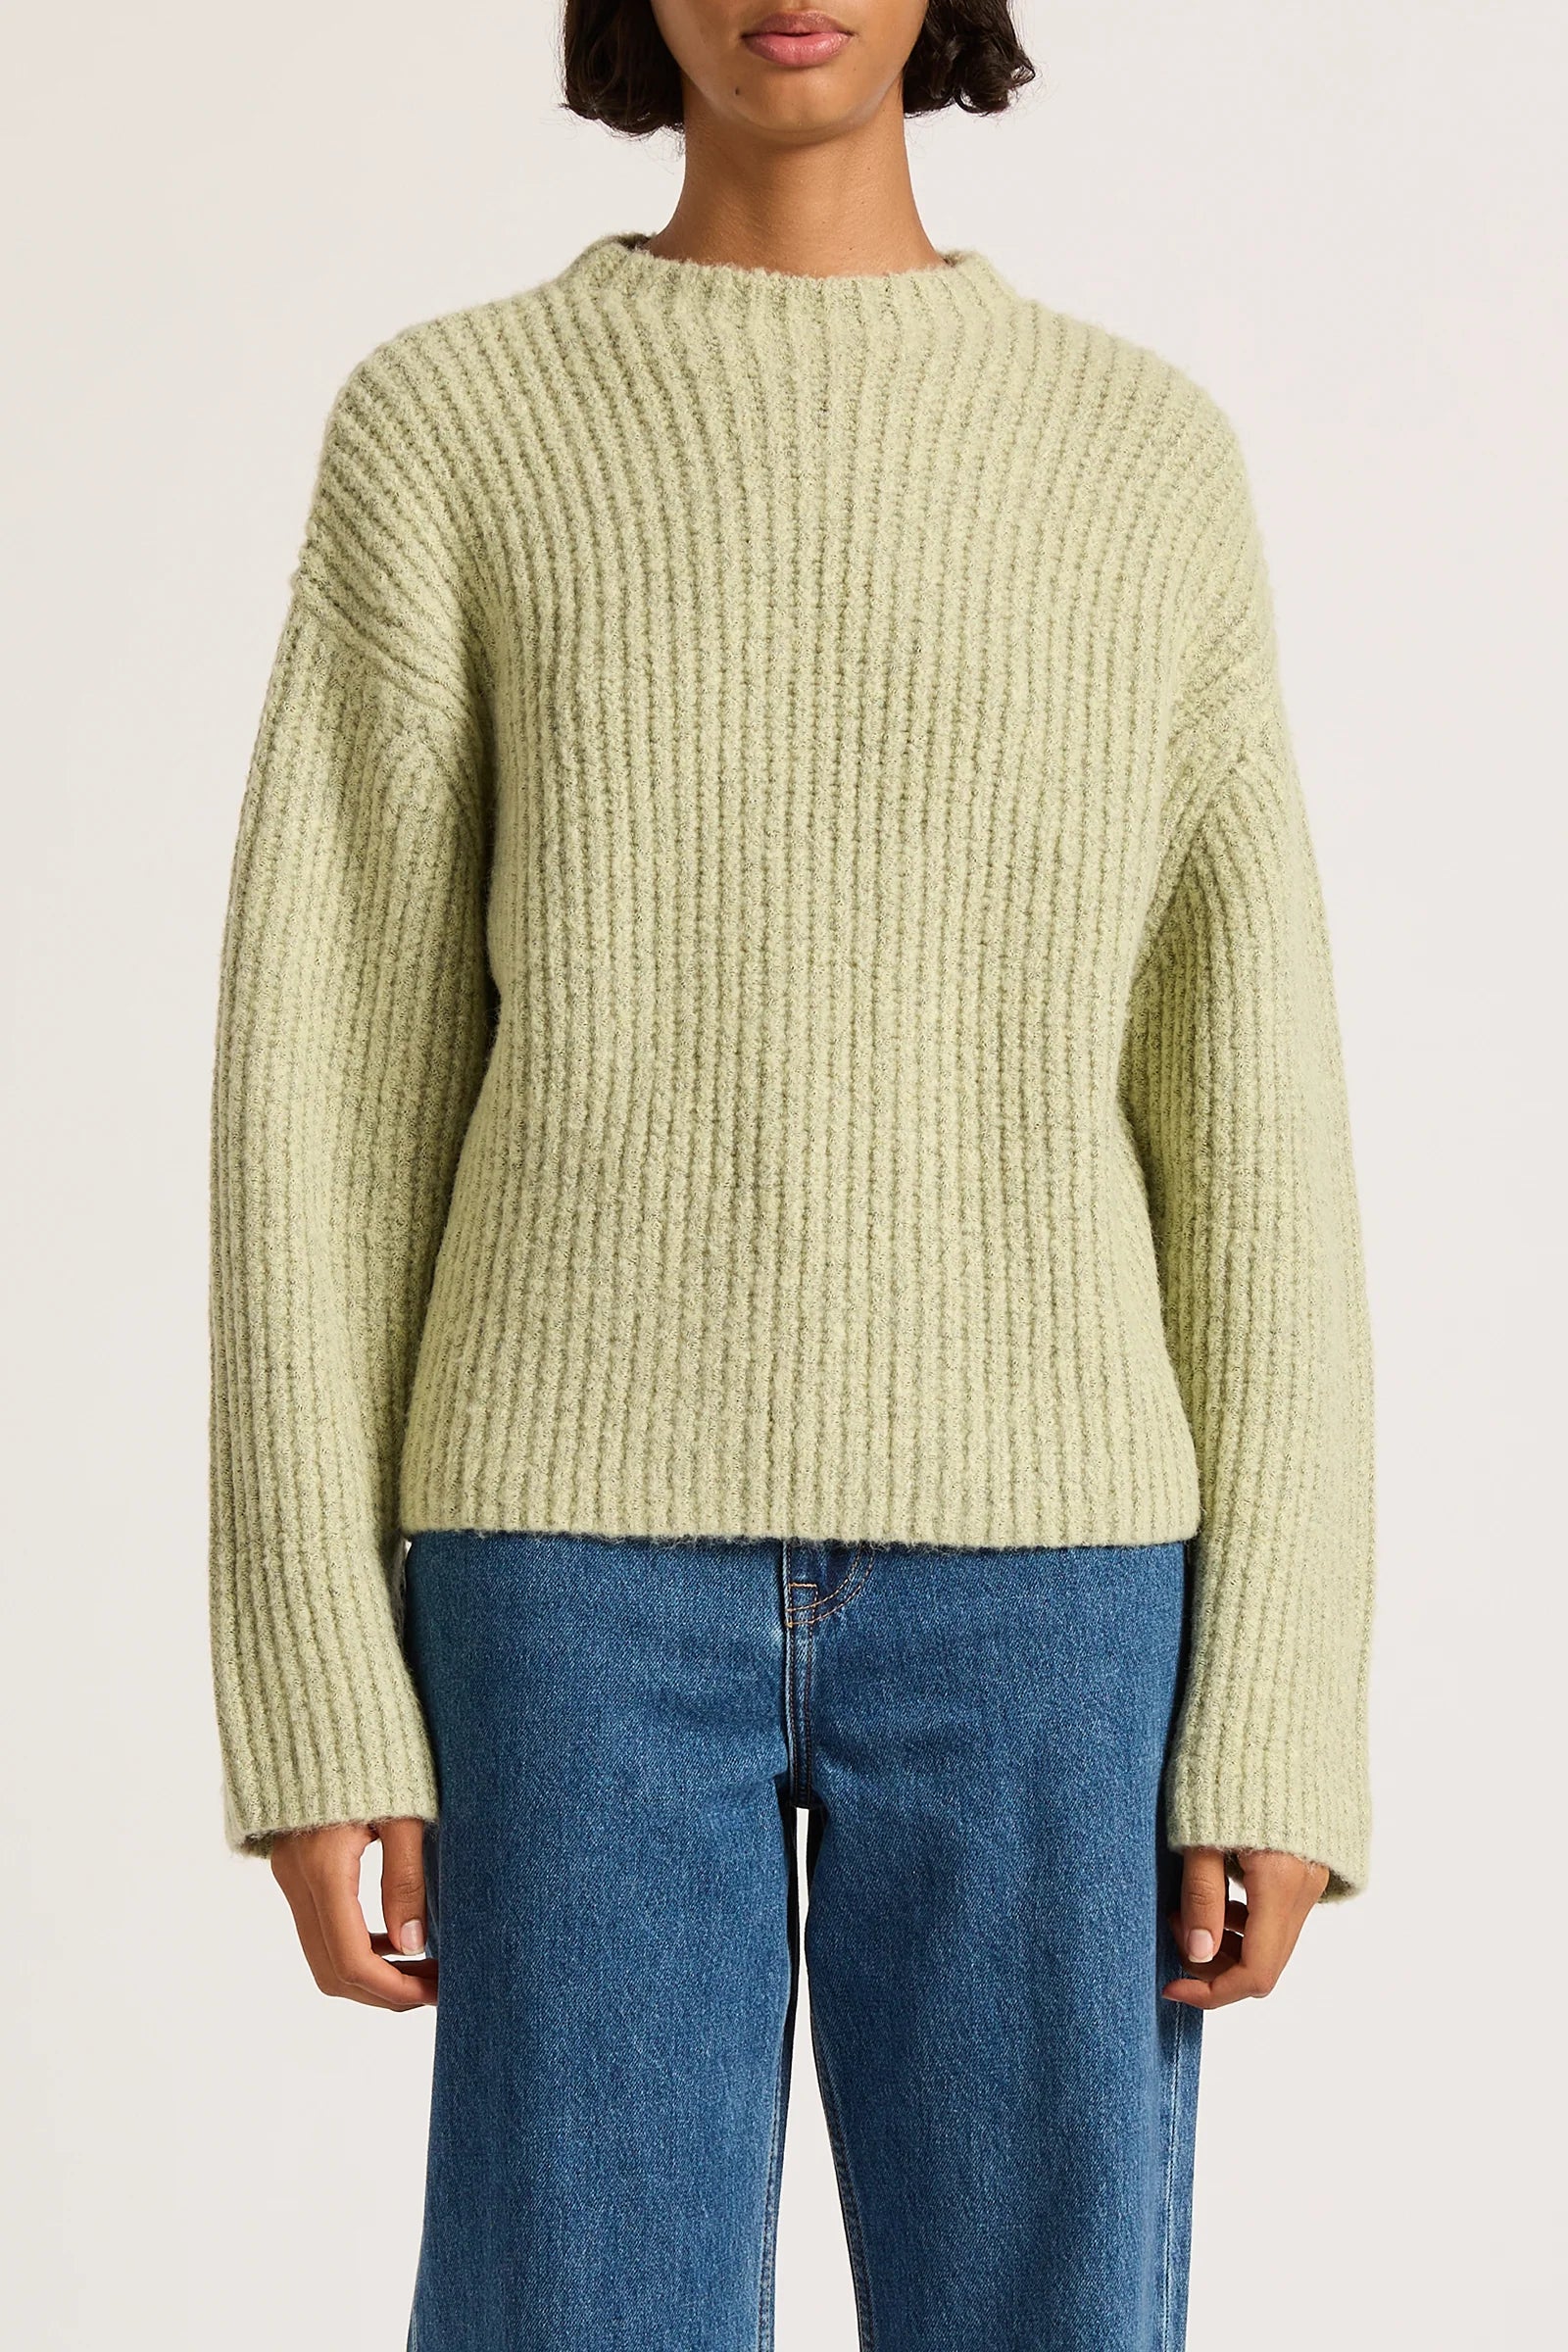 NUDE LUCY Parker knit - Grass